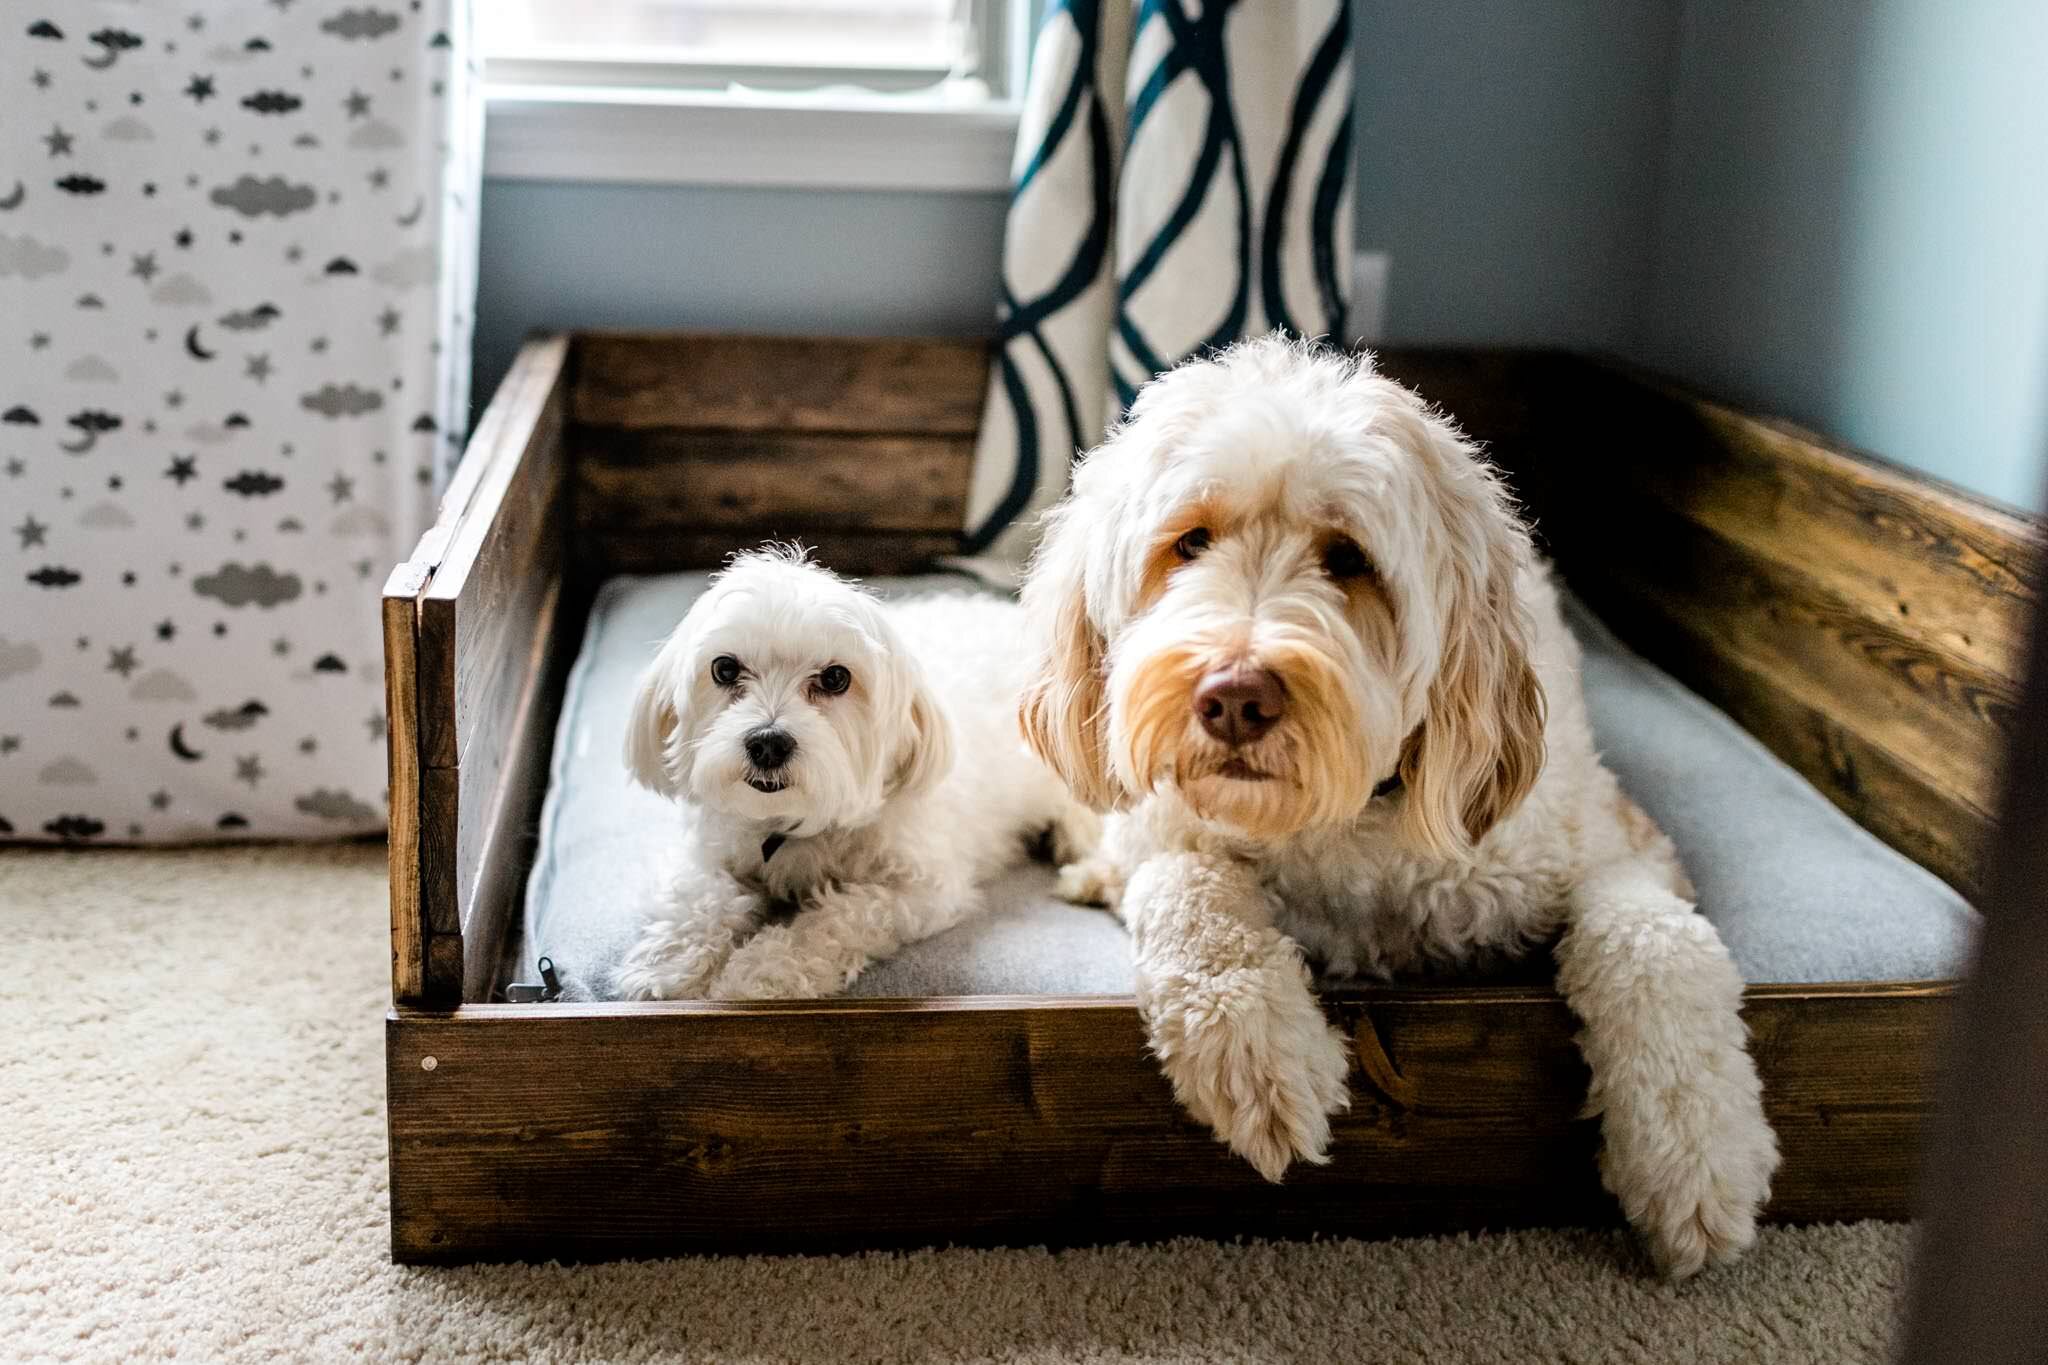 Durham Newborn Photographer | By G. Lin Photography | Two dogs sitting in bed crate by window